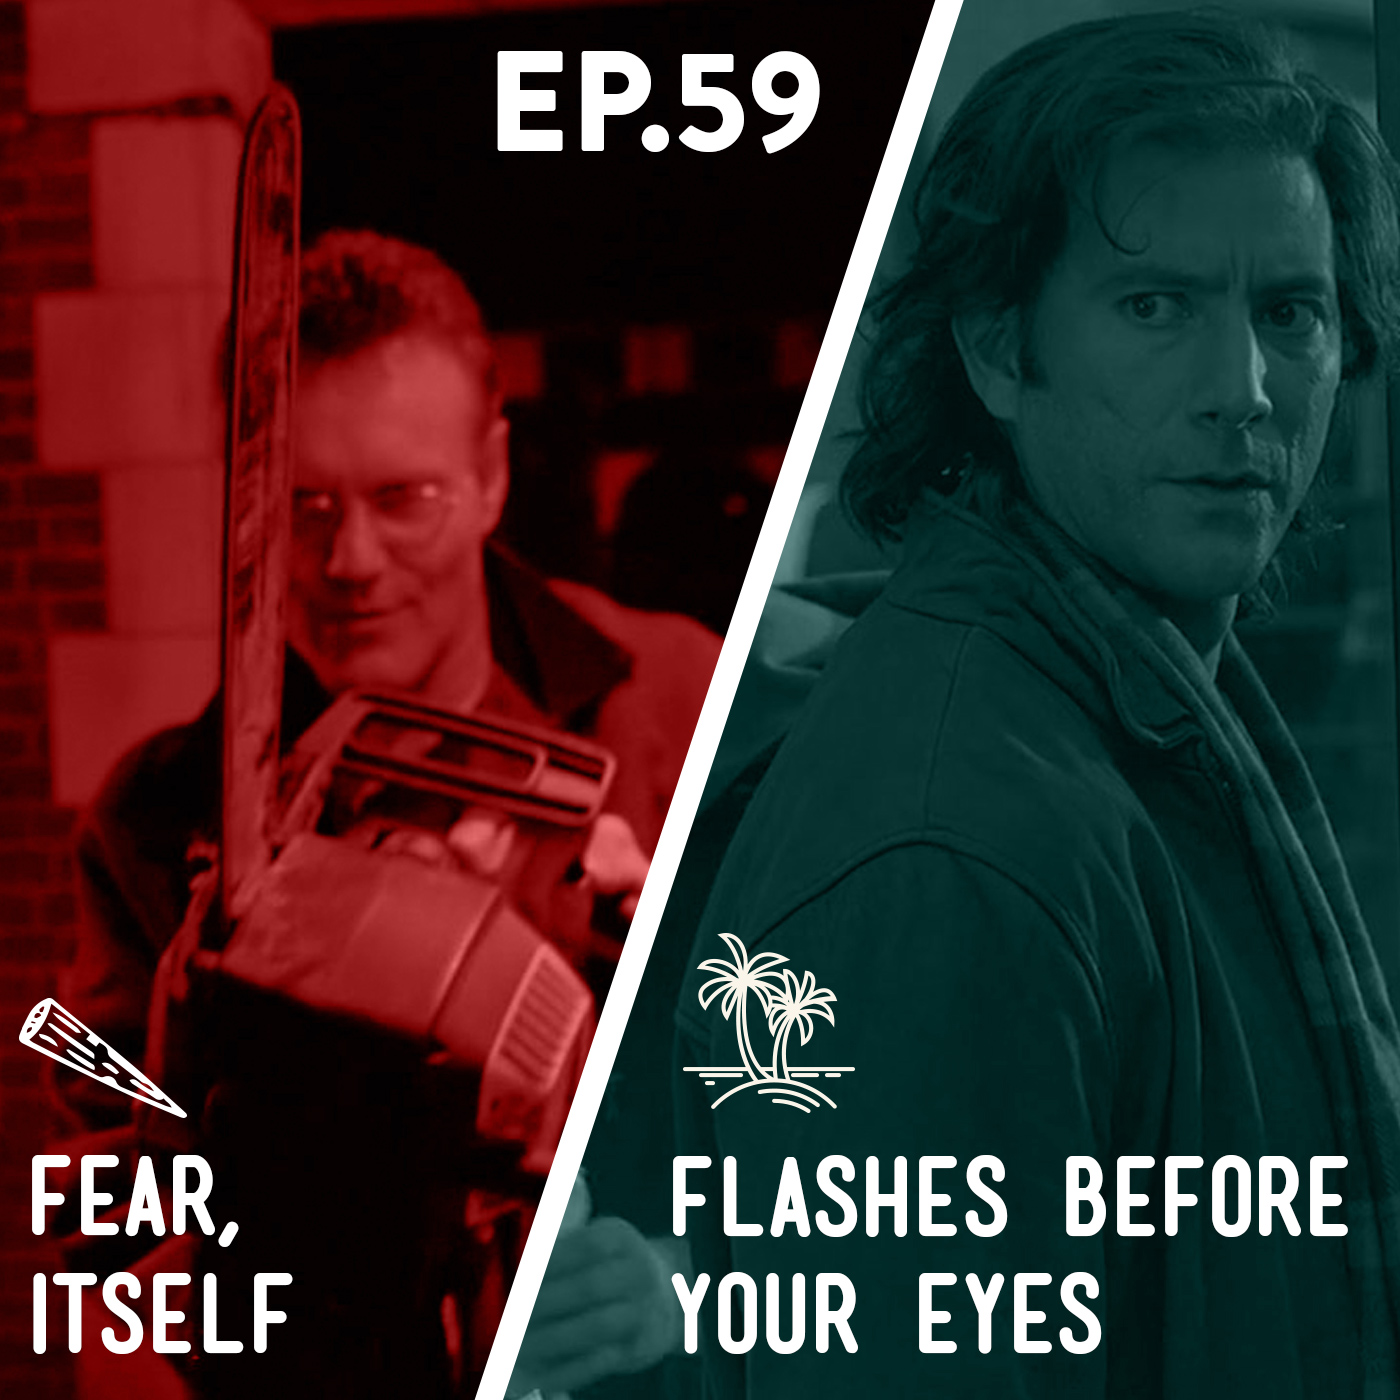 59 - Fear Itself / Flashes Before Your Eyes Image